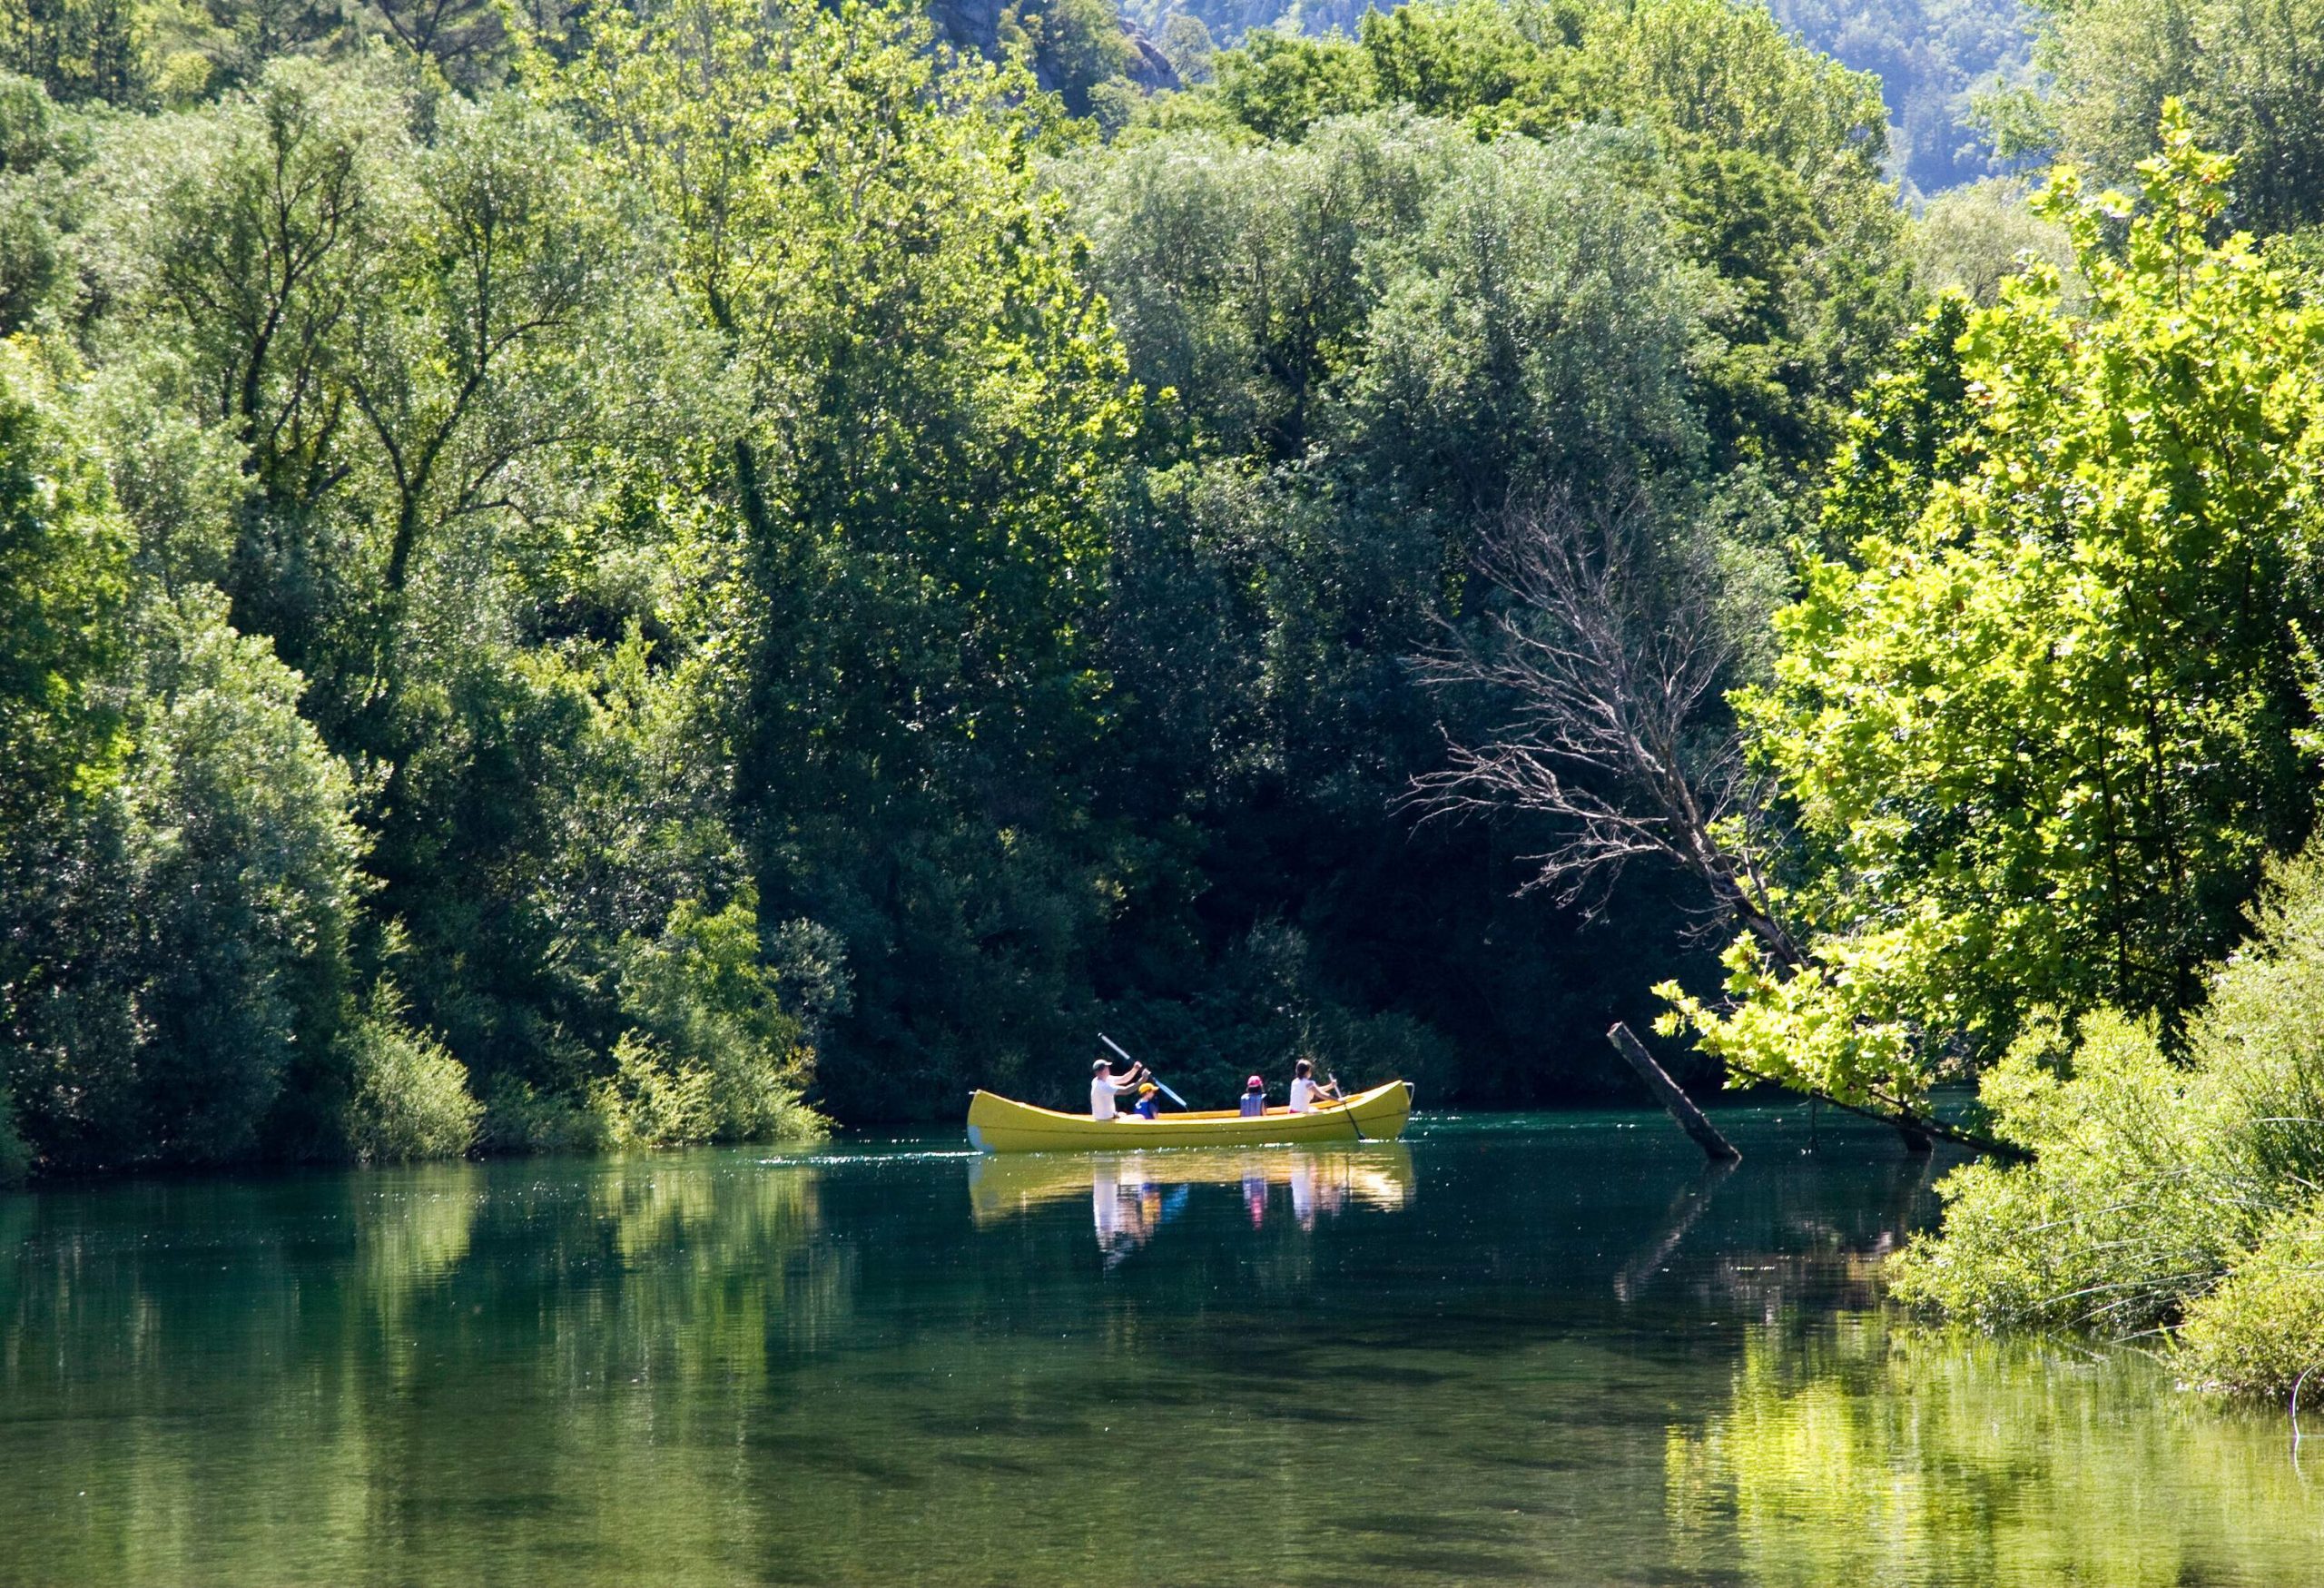 A family canoeing down the river surrounded by thick low-hanging trees.